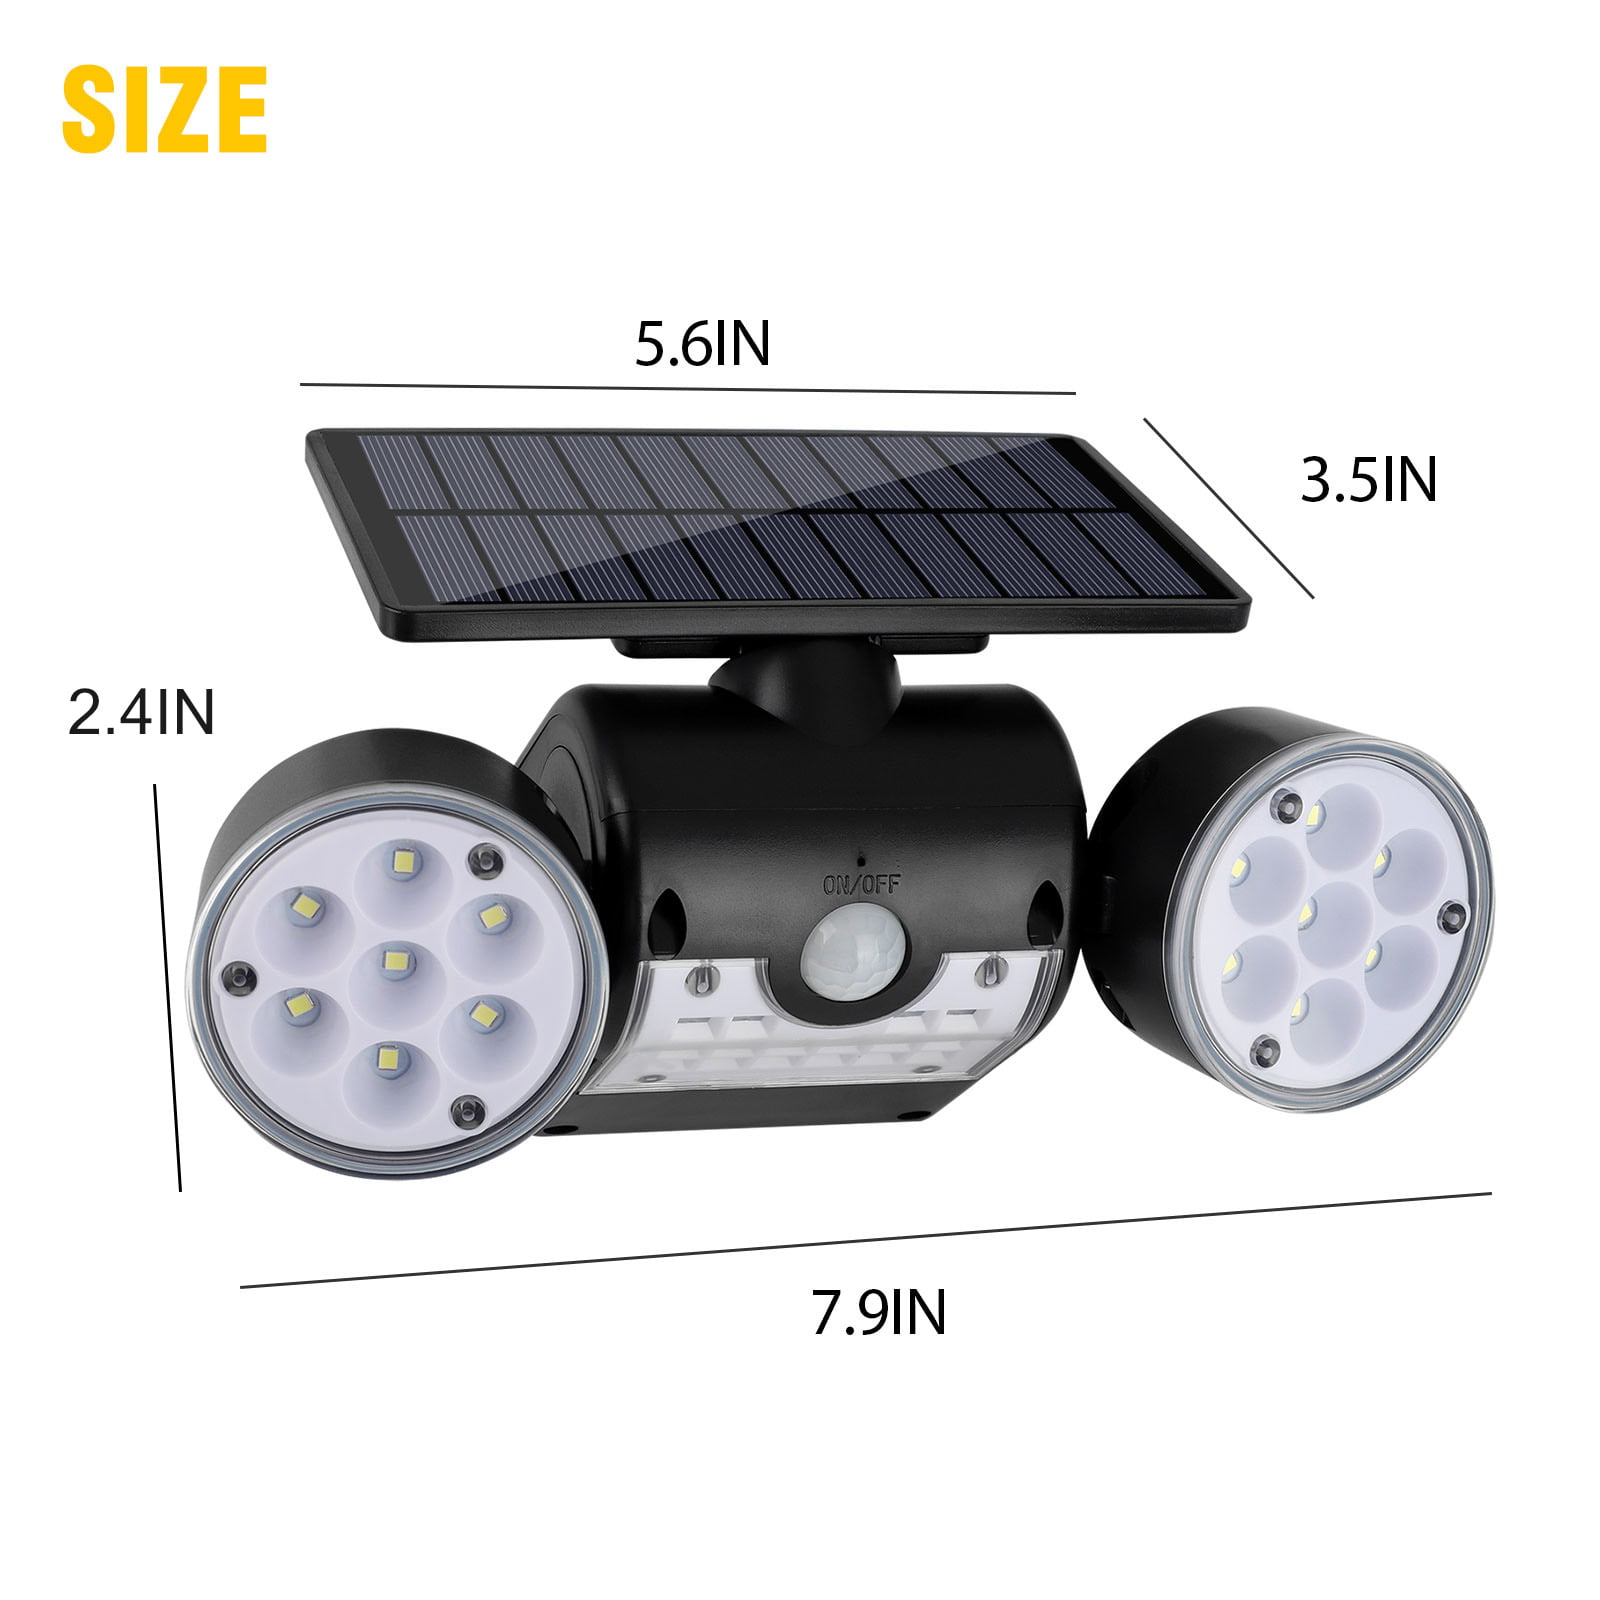 140 LED Flood Lights IP65 Waterproof Solar Powered In-Ground Spotlight 360°Rotatable Outdoor Wall Lights for Garden Garage Yard Patio Path 1 Pack Solar Security Lights Outdoor with Motion Sensor 